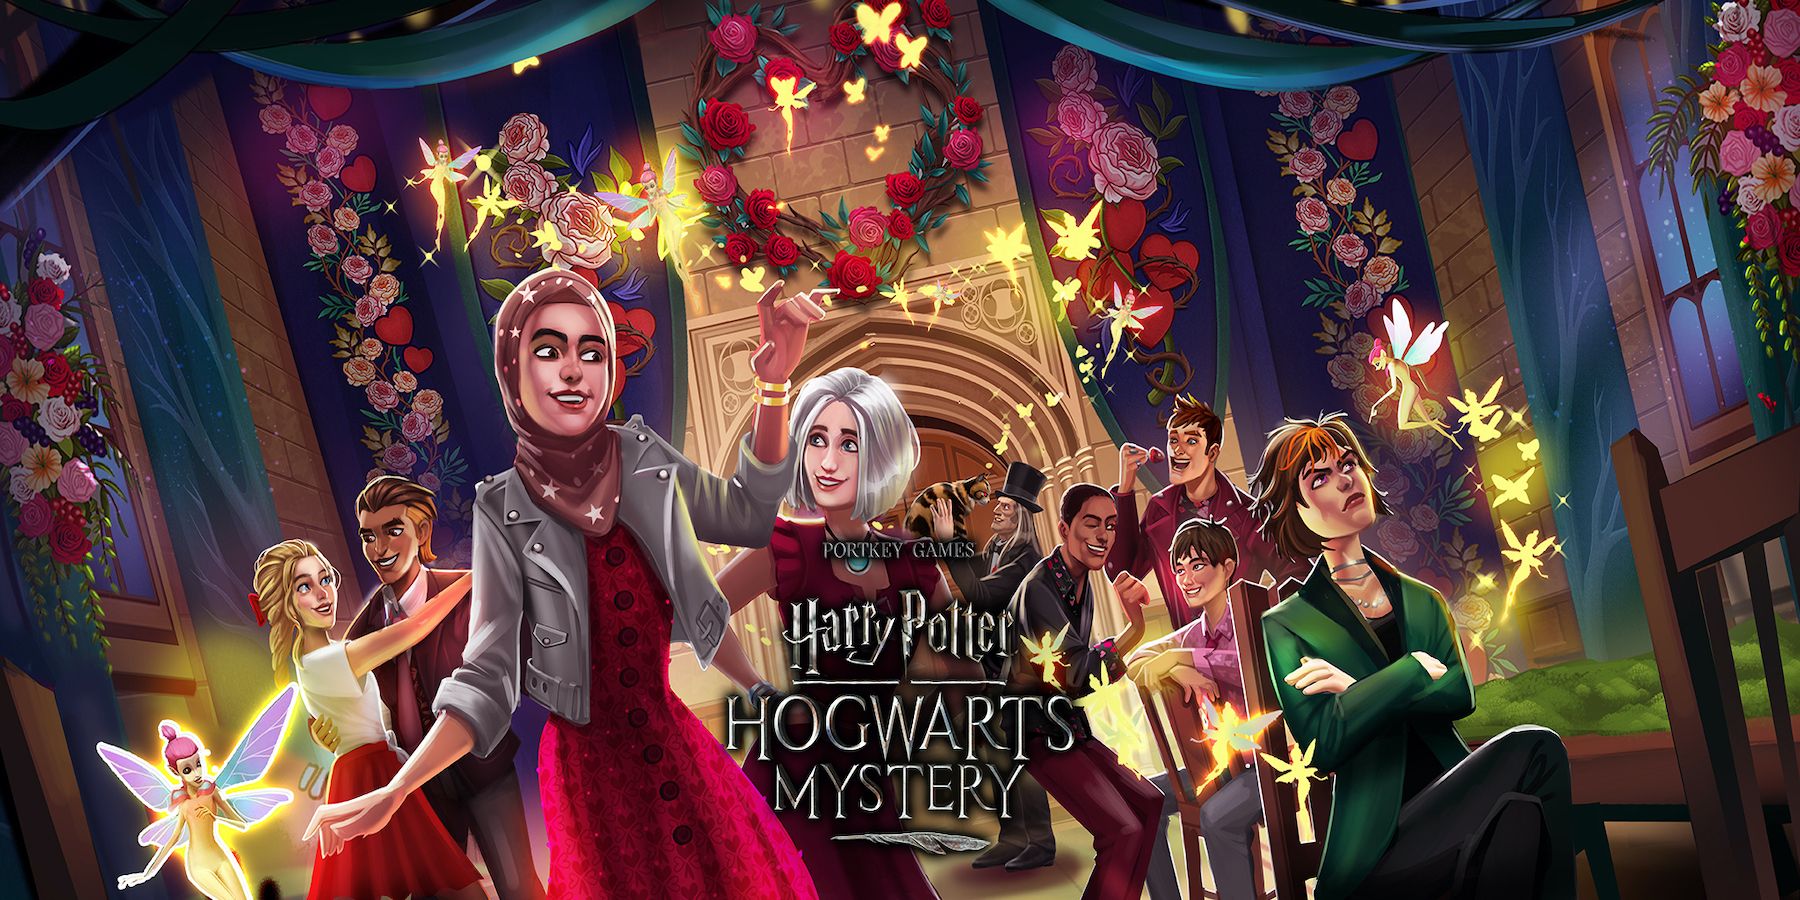 HOGWARTS MYSTERY COVER 3